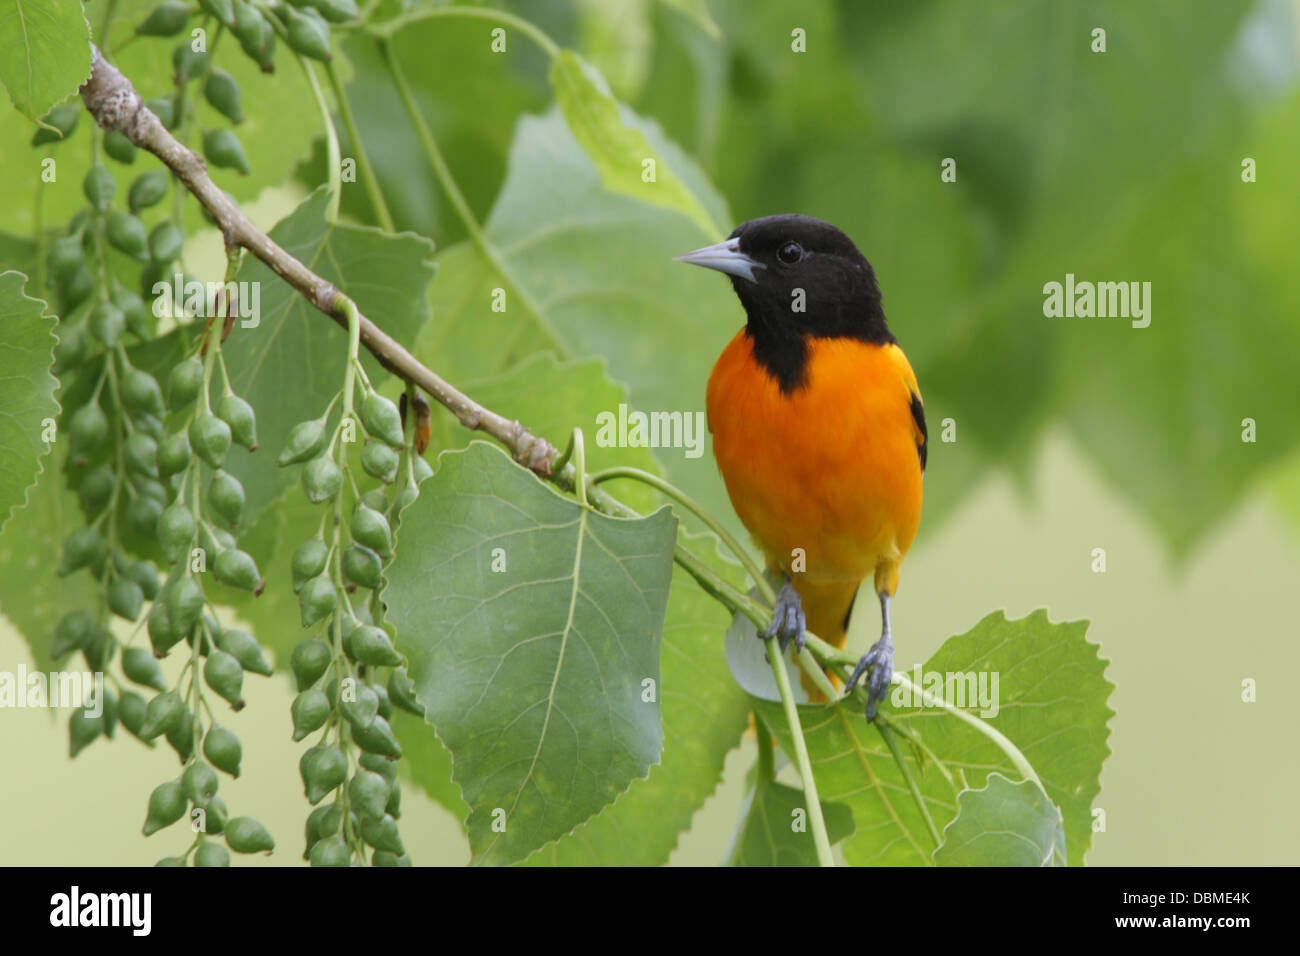 Baltimore Oriole perched in Cottonwood Tree perching bird songbird Ornithology Science Nature Wildlife Environment Stock Photo